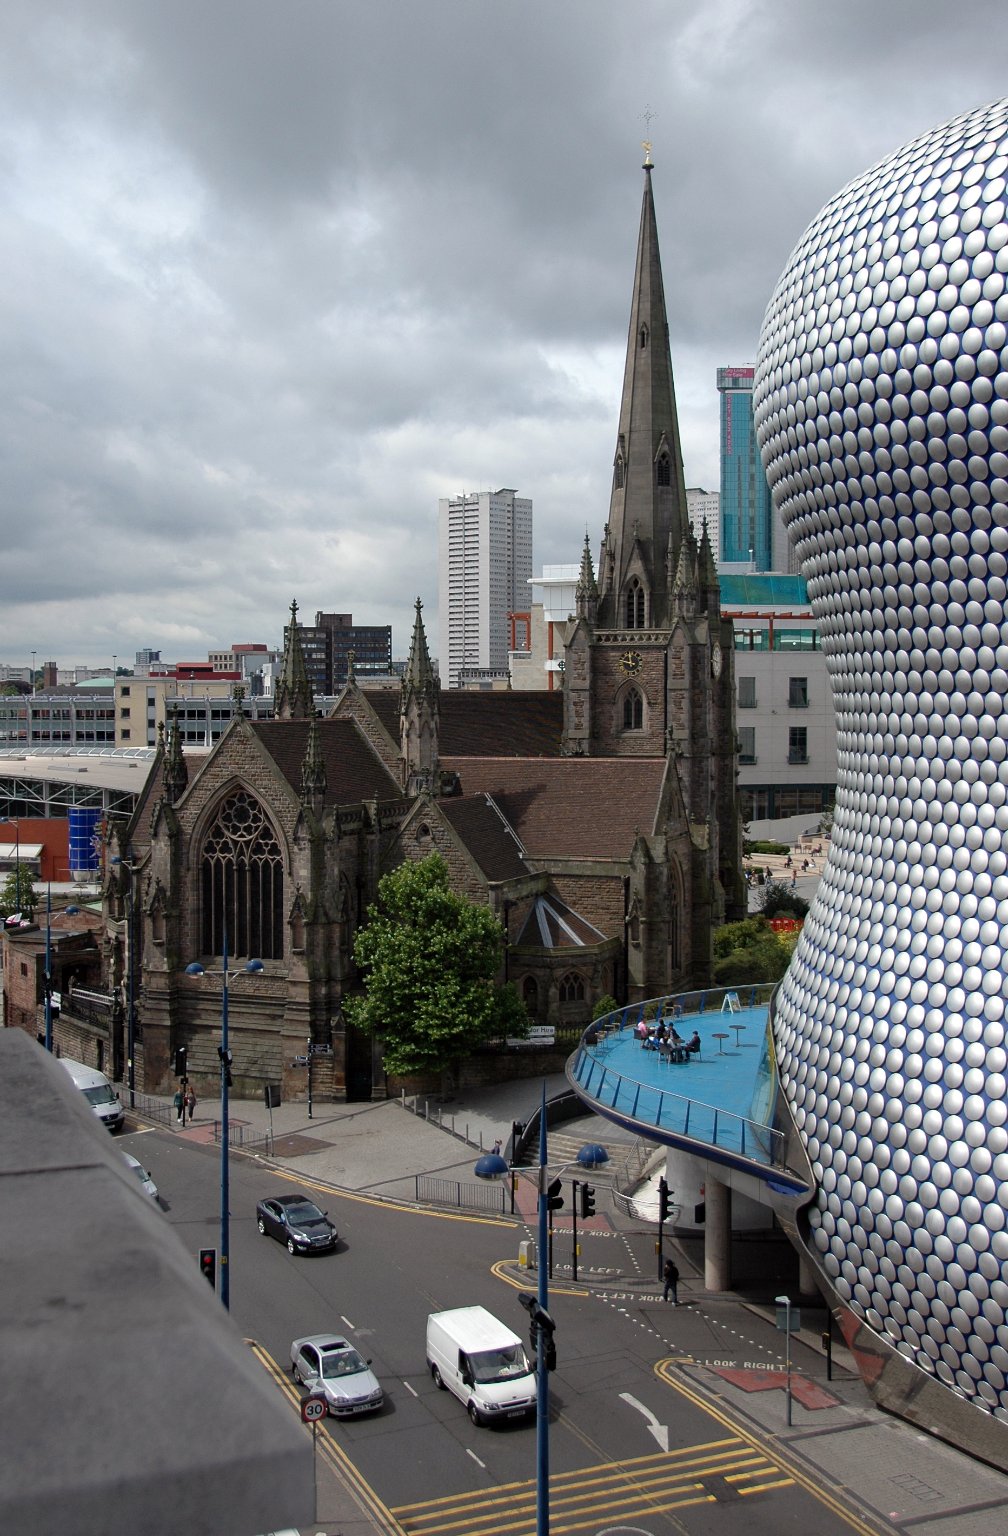 St Martin's in The Bullring and Selfridges